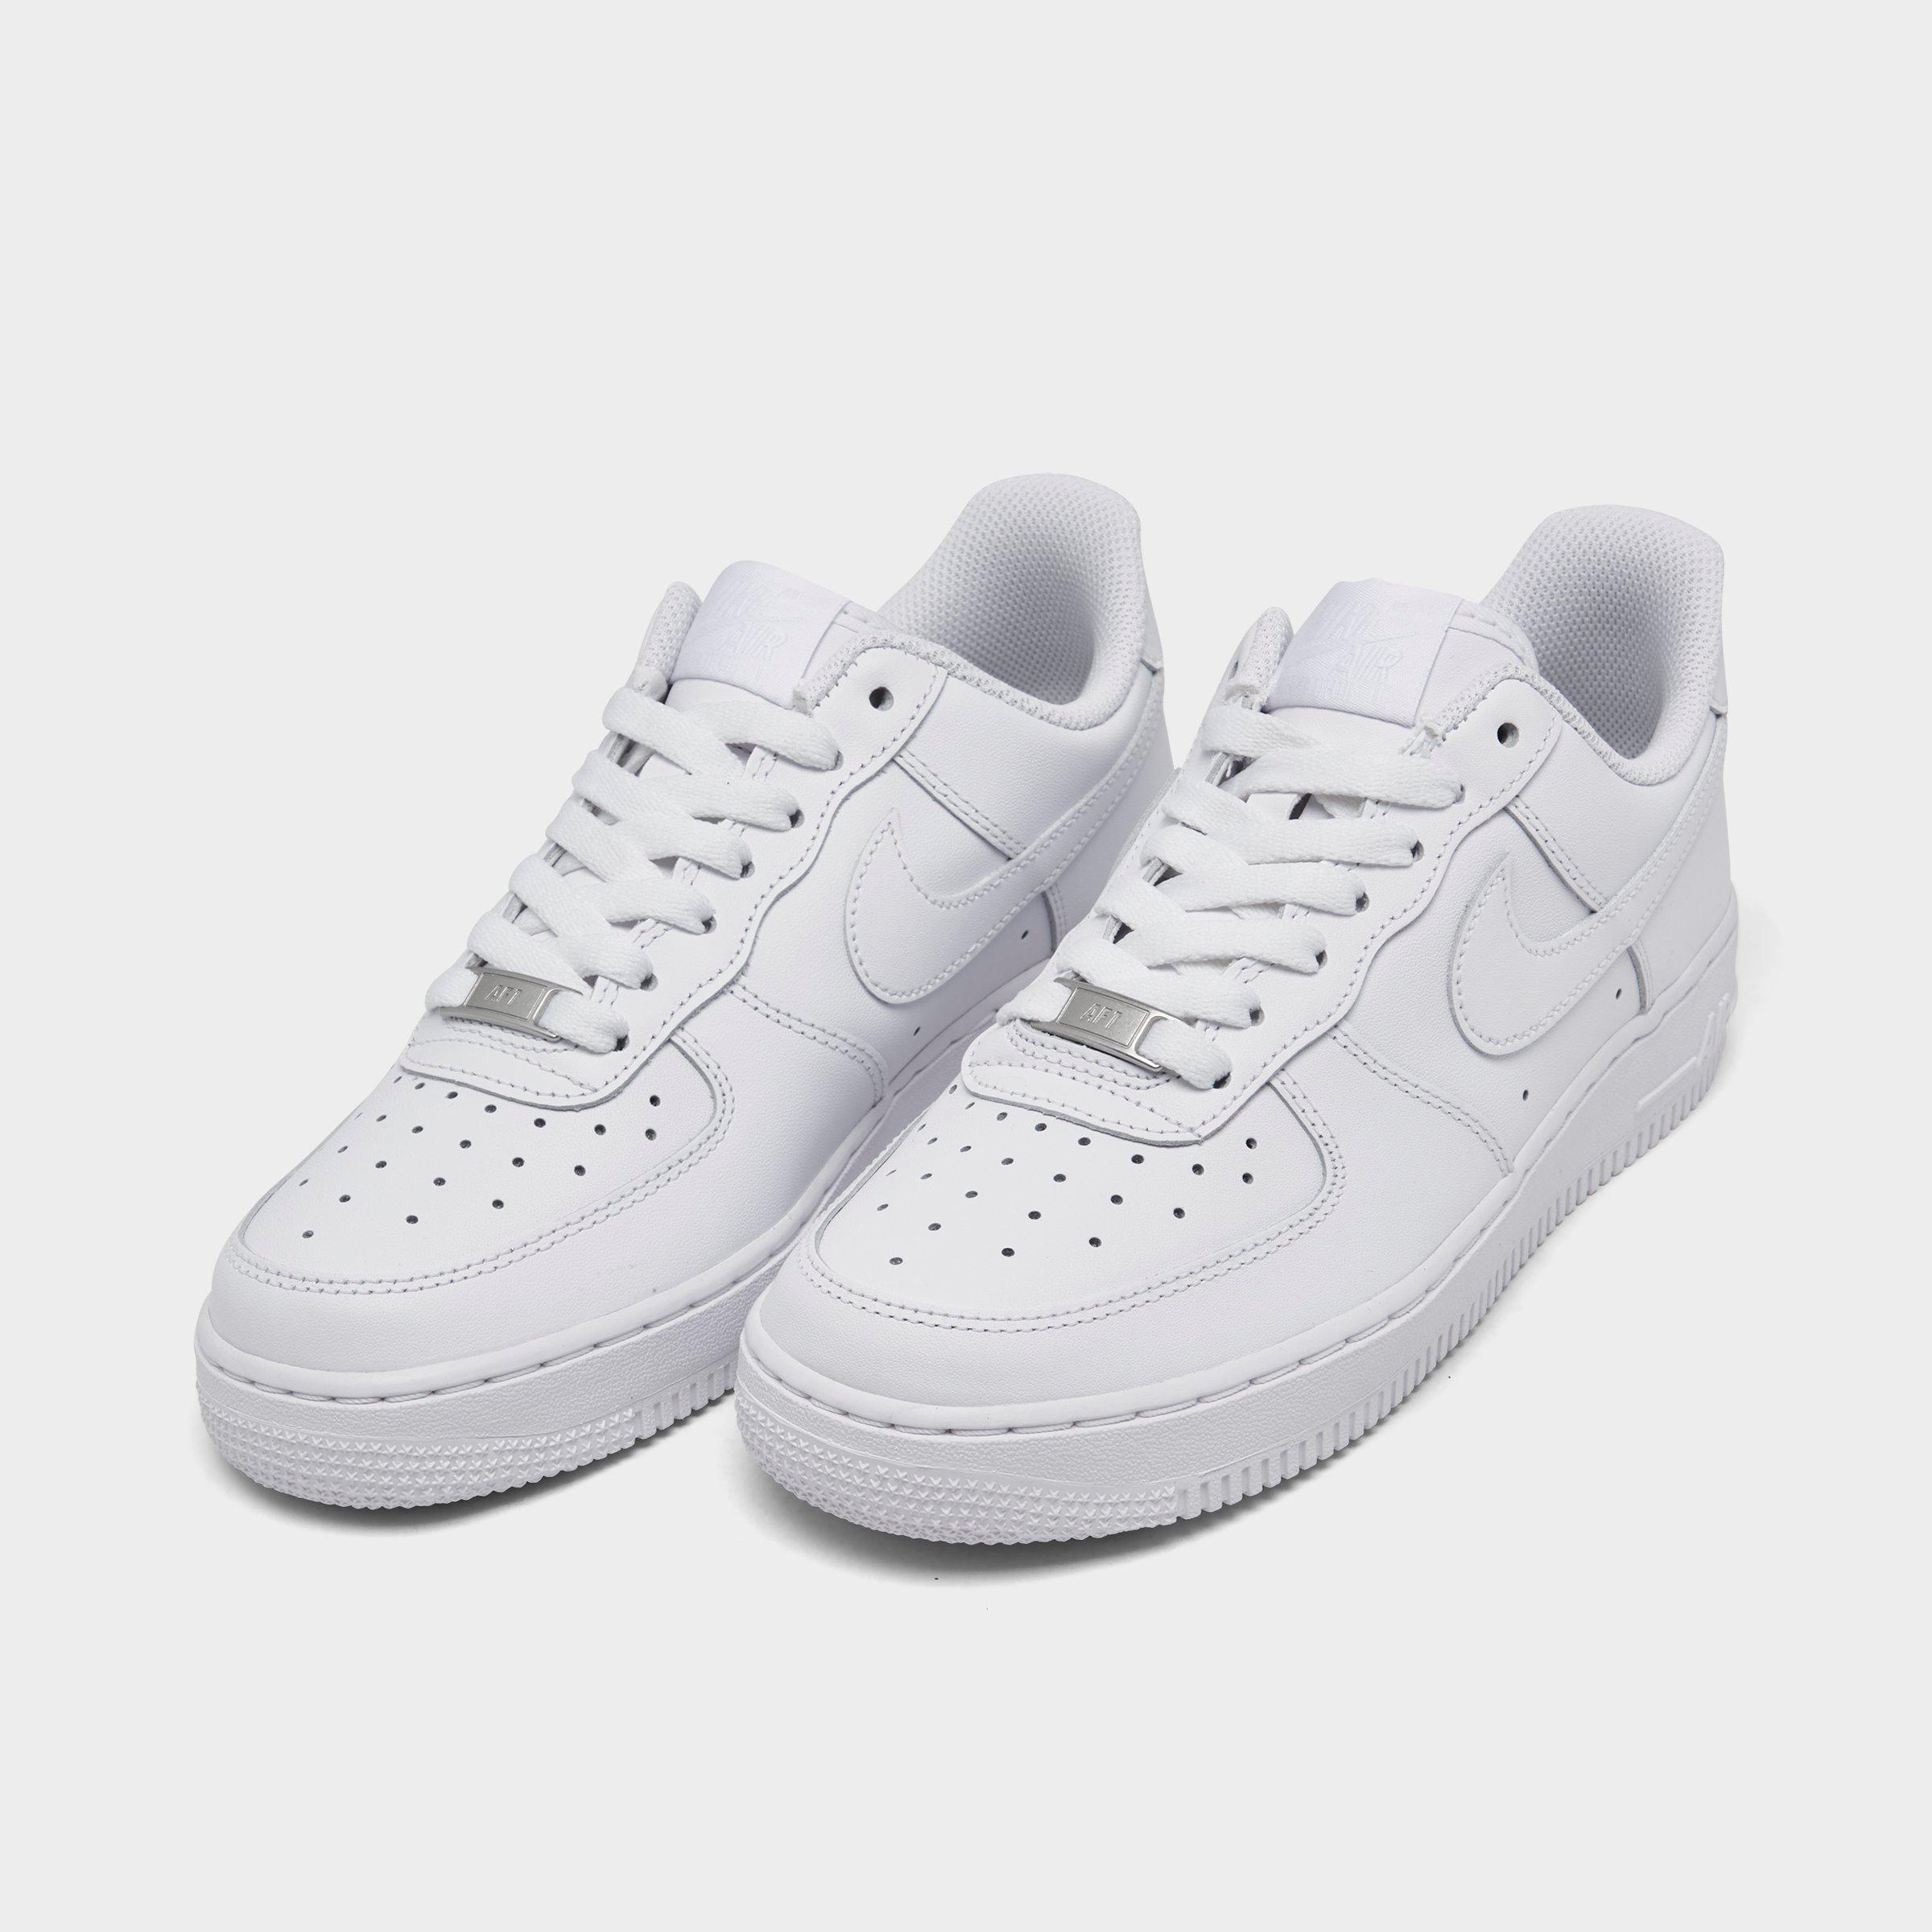 white low nike air force 1 womens